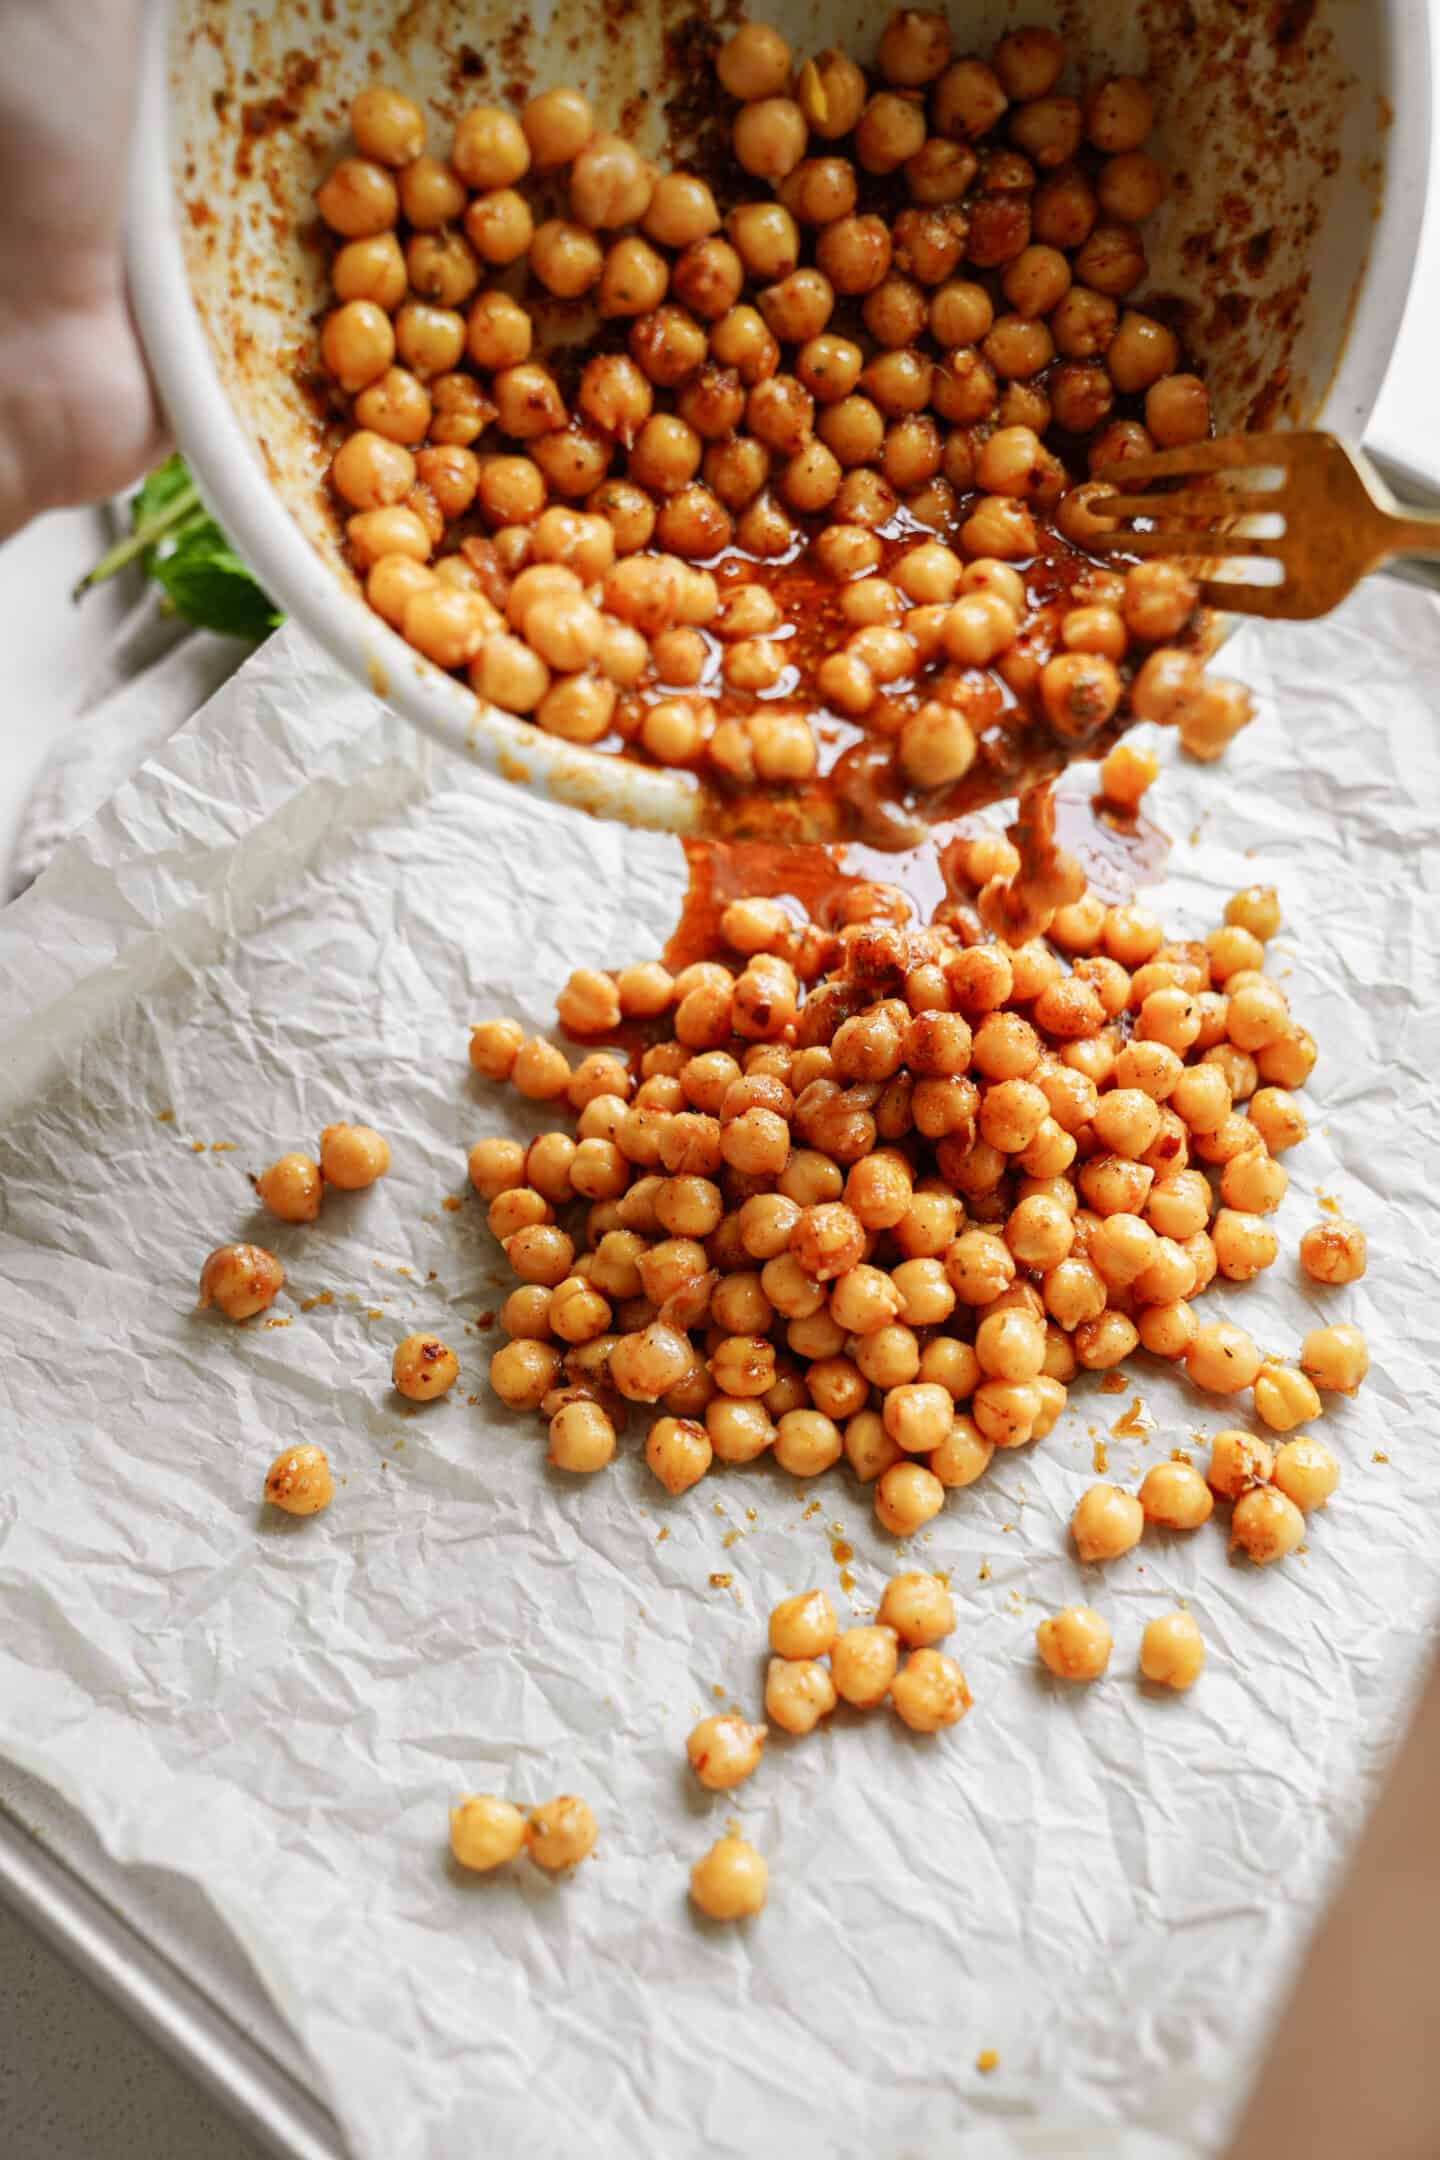 Chickpeas being poured on a baking tray